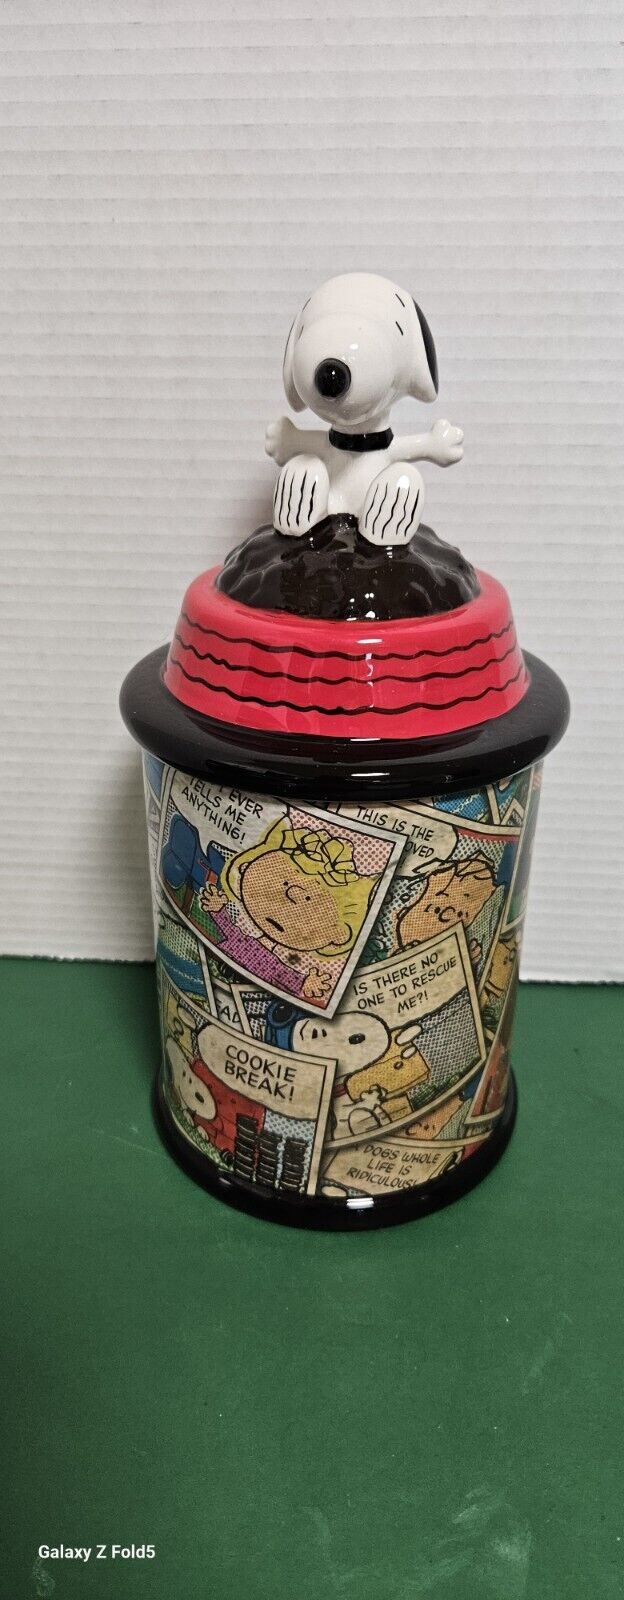 Very Rare Peanuts Snoopy Comic Strip Cookie Jar. By Westland Giftware. Excellent